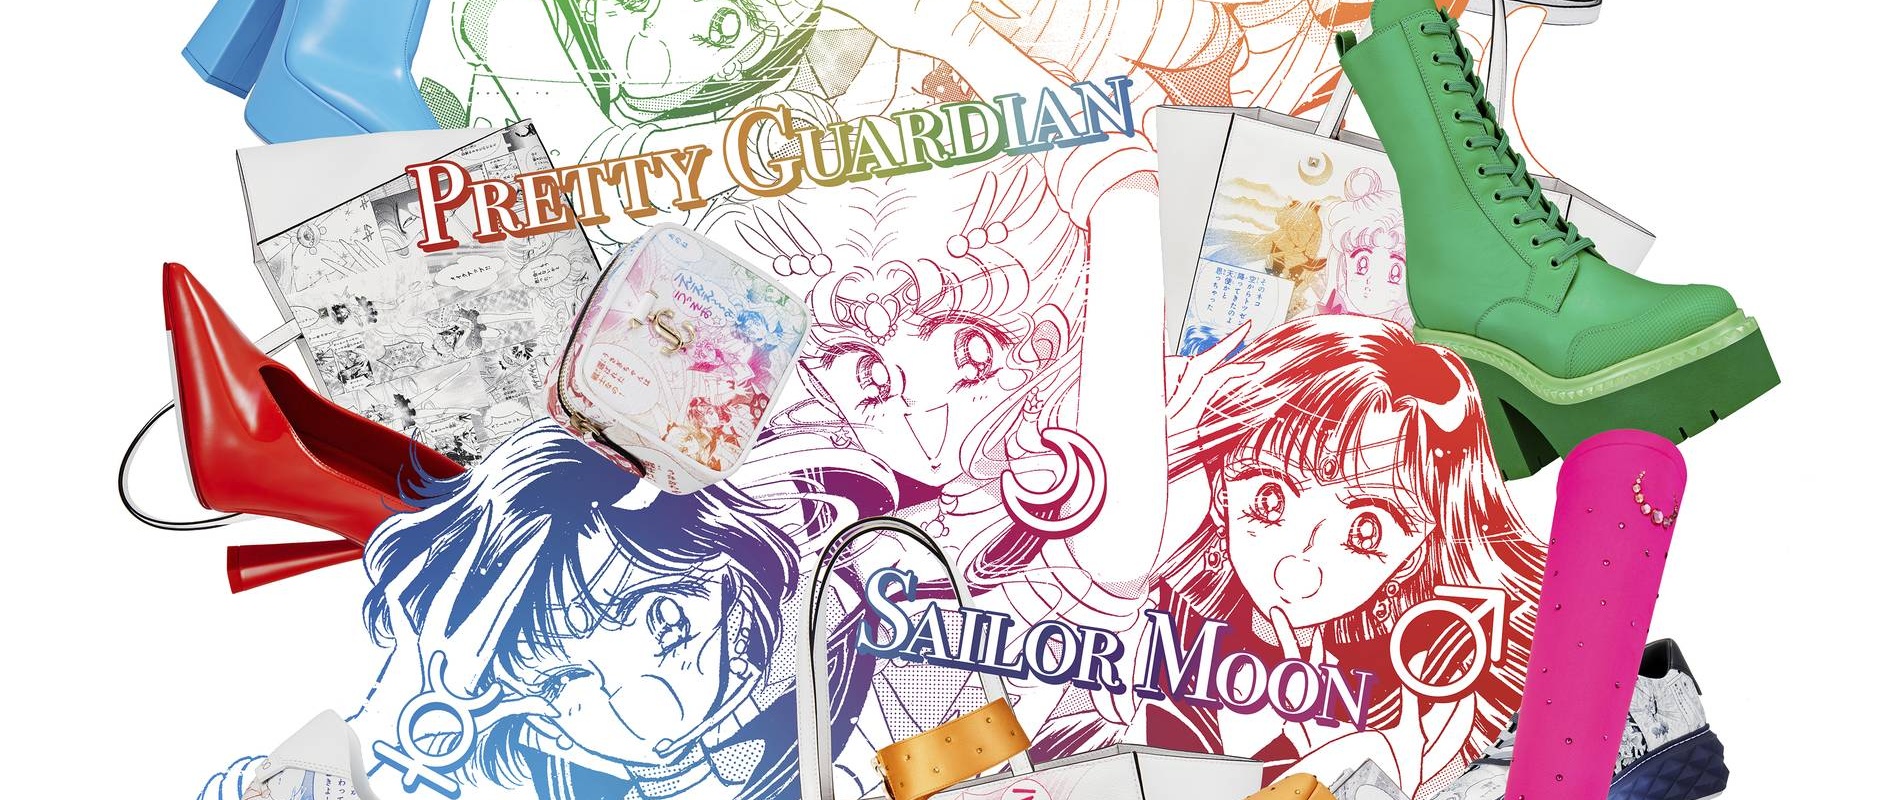 Shop Sailor Moon's Shoes From Jimmy Choo Capsule Collection